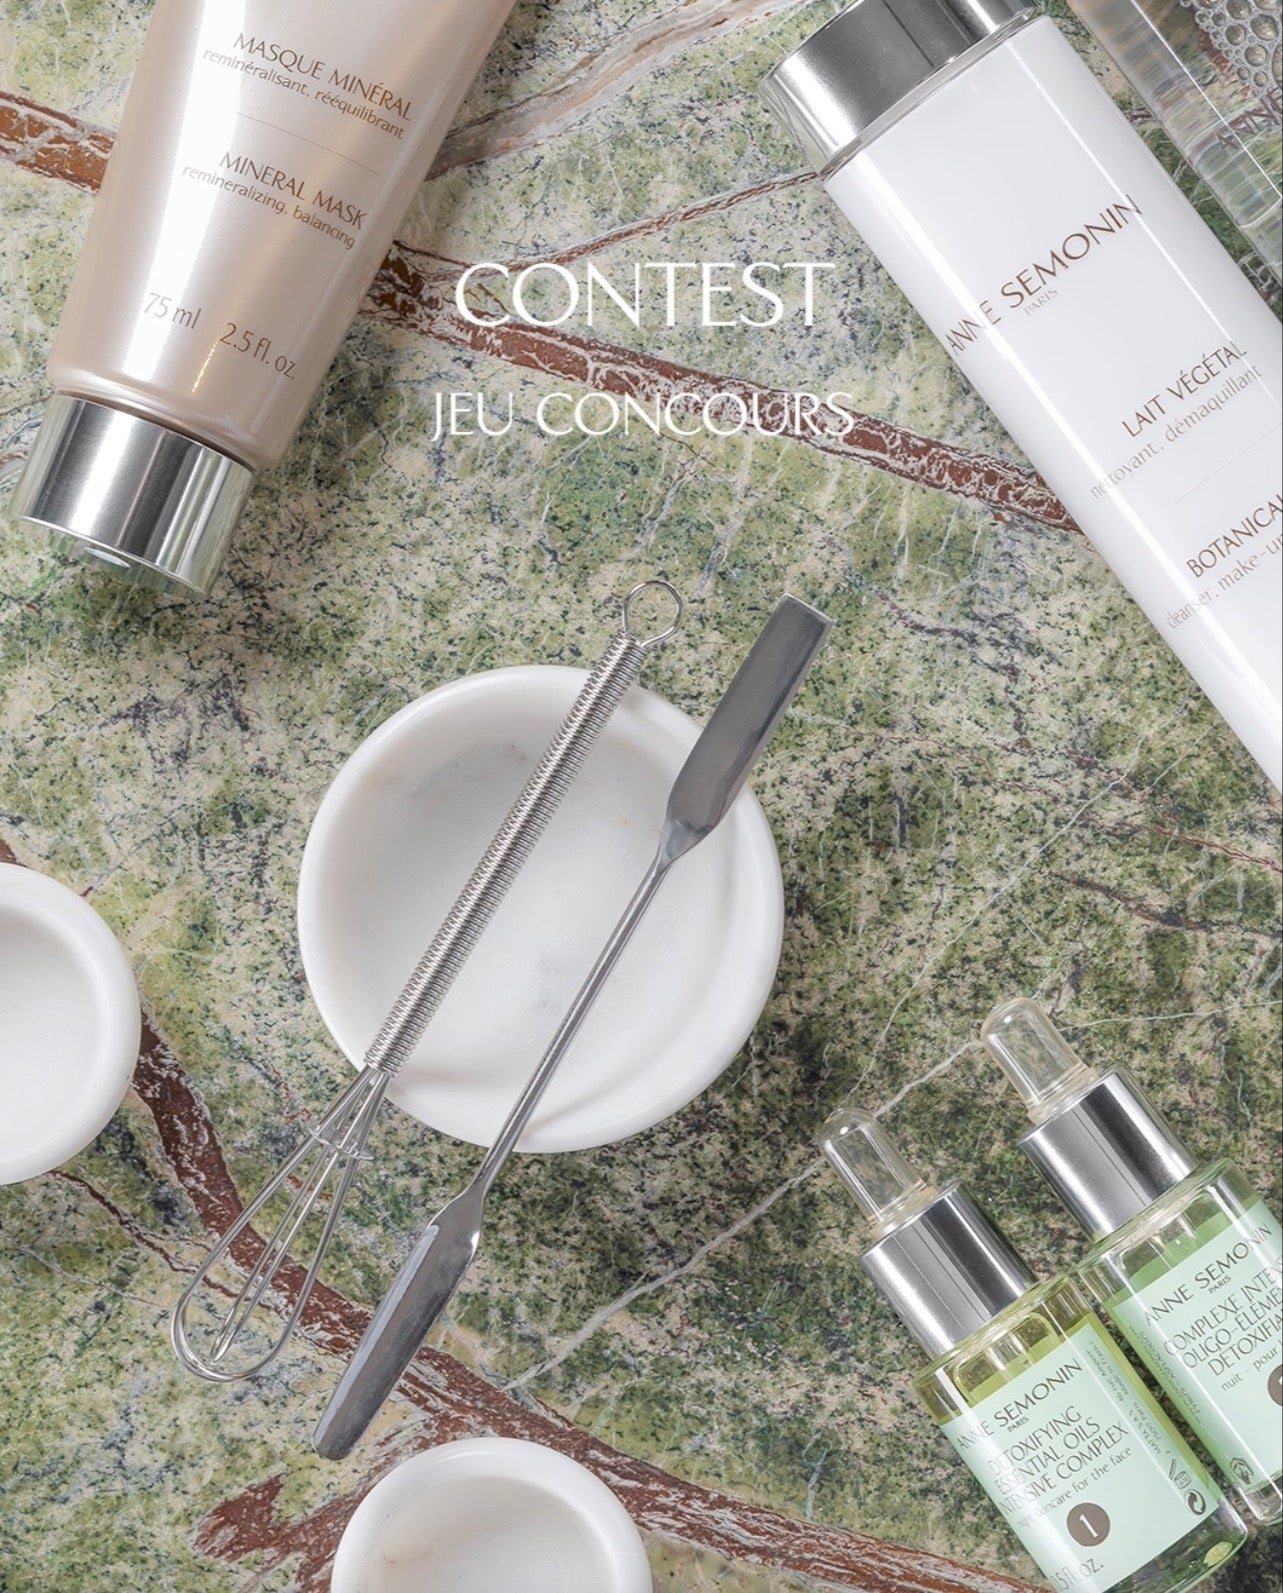 https://www.instagram.com/p/Cncbl9gKgHe/[SHARP-CAPTION]CONTEST 💌

Make customised products a part of your skincare routine this year, thanks to Anne Semonin mixology! You can win 2 products to make your first skincare combination: the Balancing Intensive Complex and Mineral Mask. Mix 2 drops of essential oil + 2 drops of trace elements with the Mask to personalise and intensify its effect. Can't wait to try this?

- Like this post
- Follow @annesemoninfrance
- Tag two friends in a comment below
- You have u